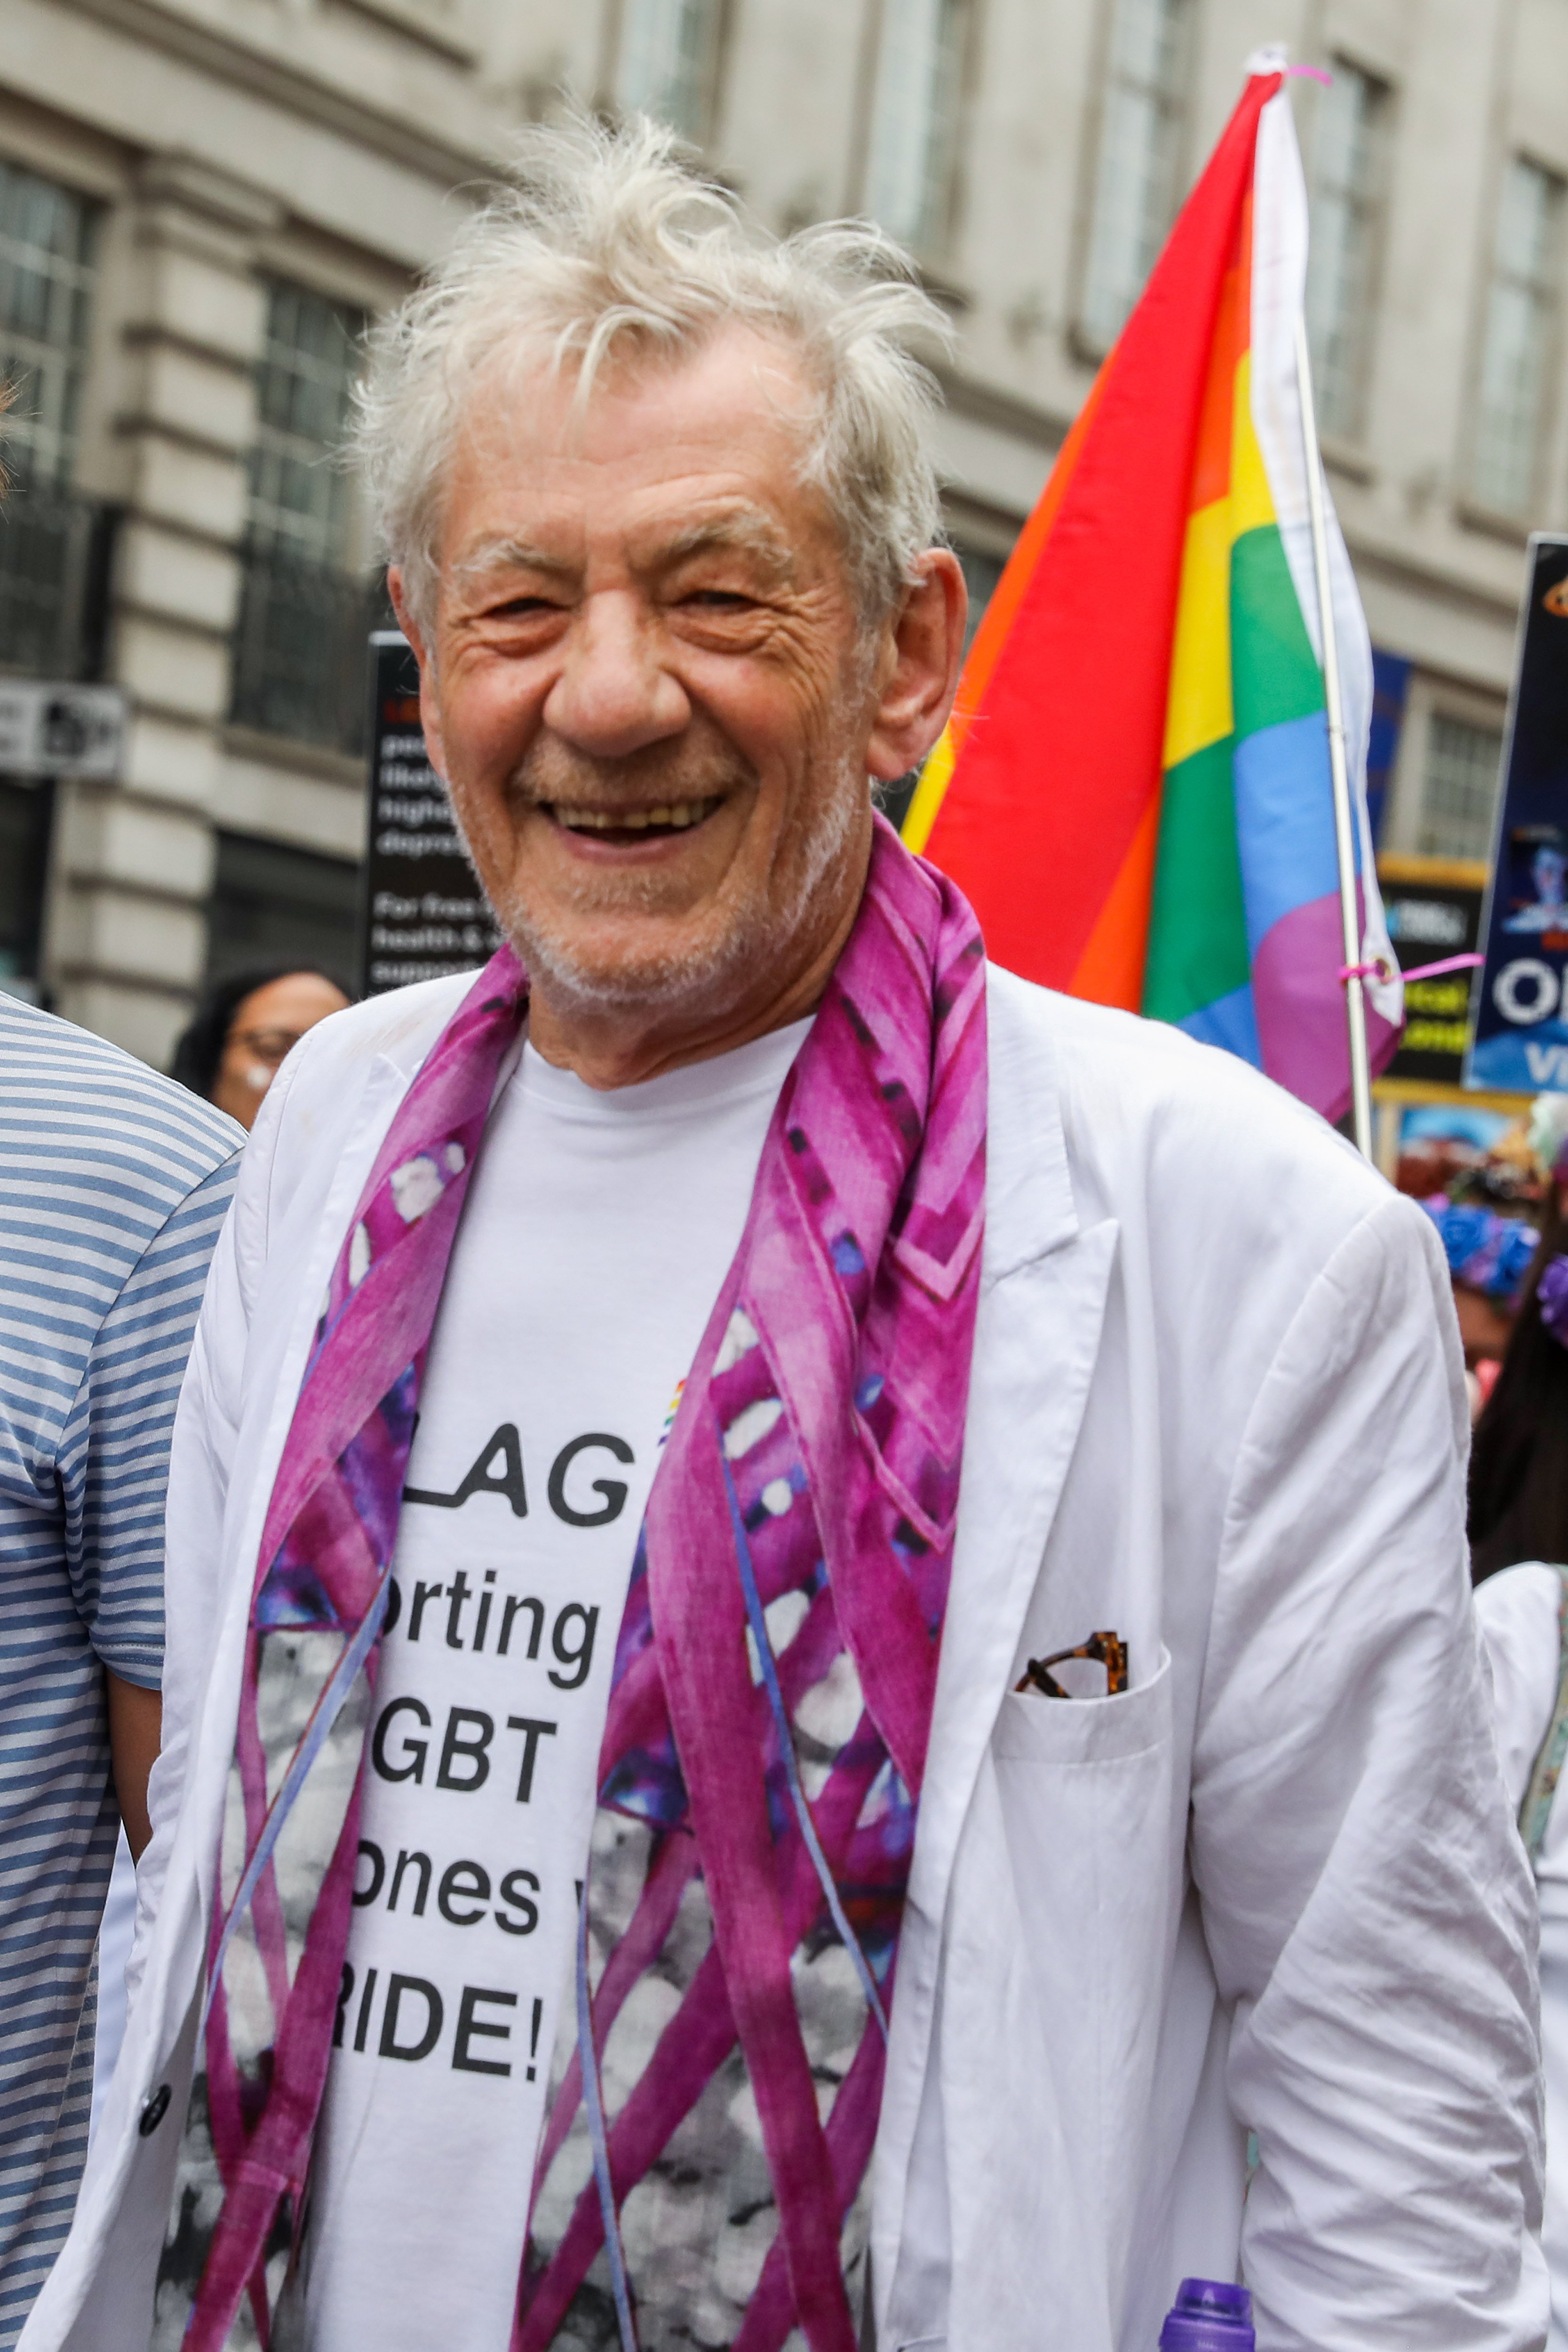 Ian McKellen walking through Piccadilly Circus during Pride in London 2019 on July 06, 2019 in London, England. | Source: Getty Images